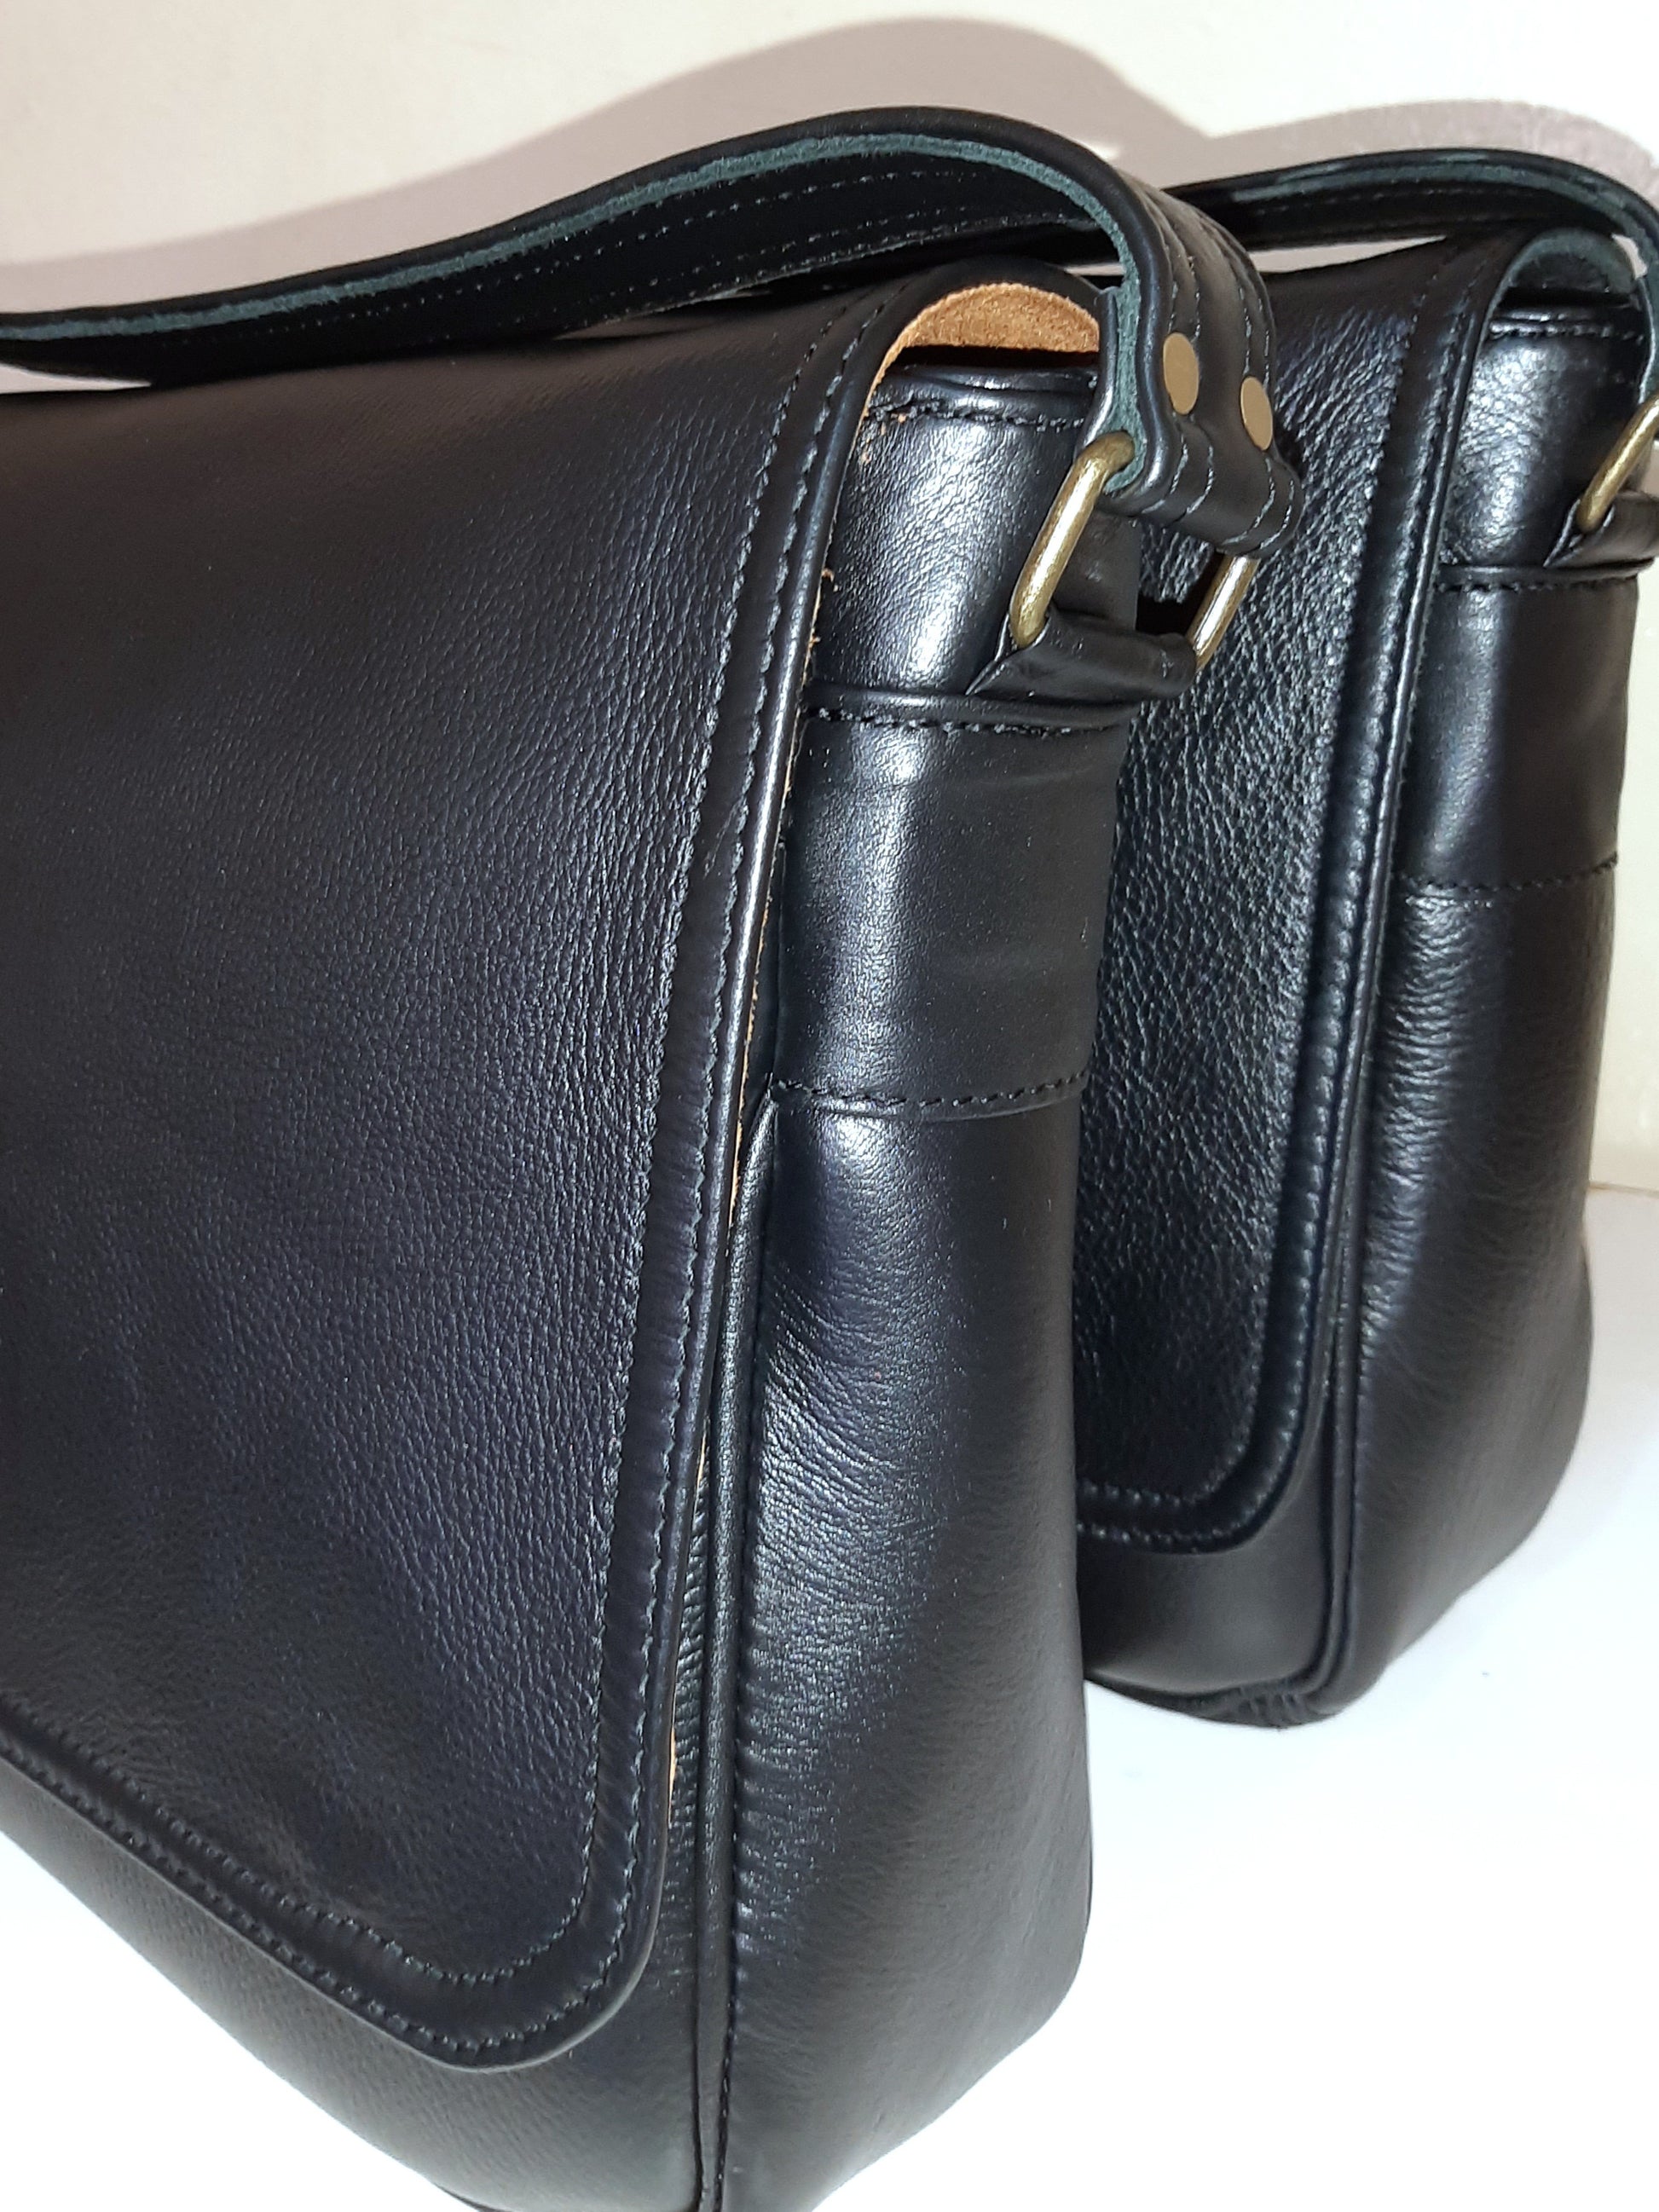 Men's laptop bags 13 - 14 inches in black colour made by  cape Masai leather 